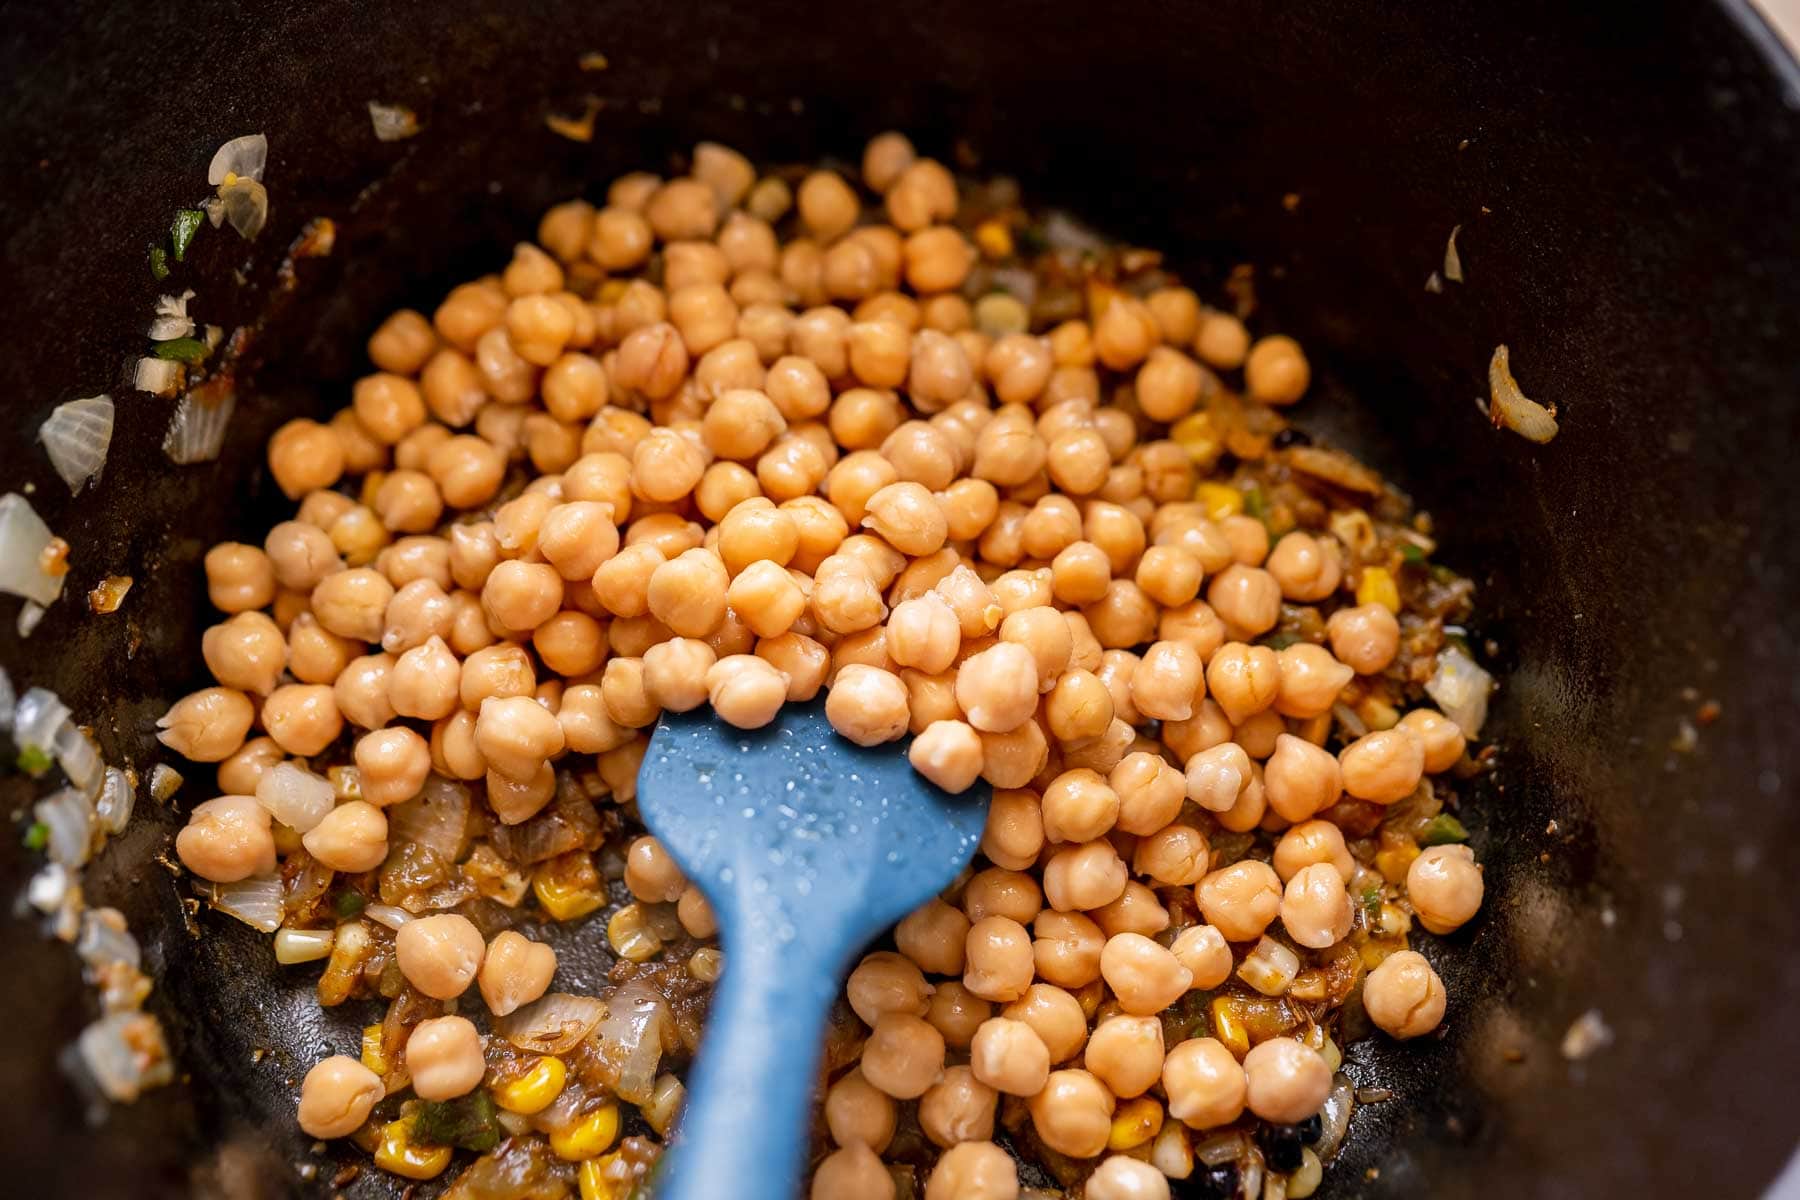 Chickpeas in a pot with a blue silicone spatula.